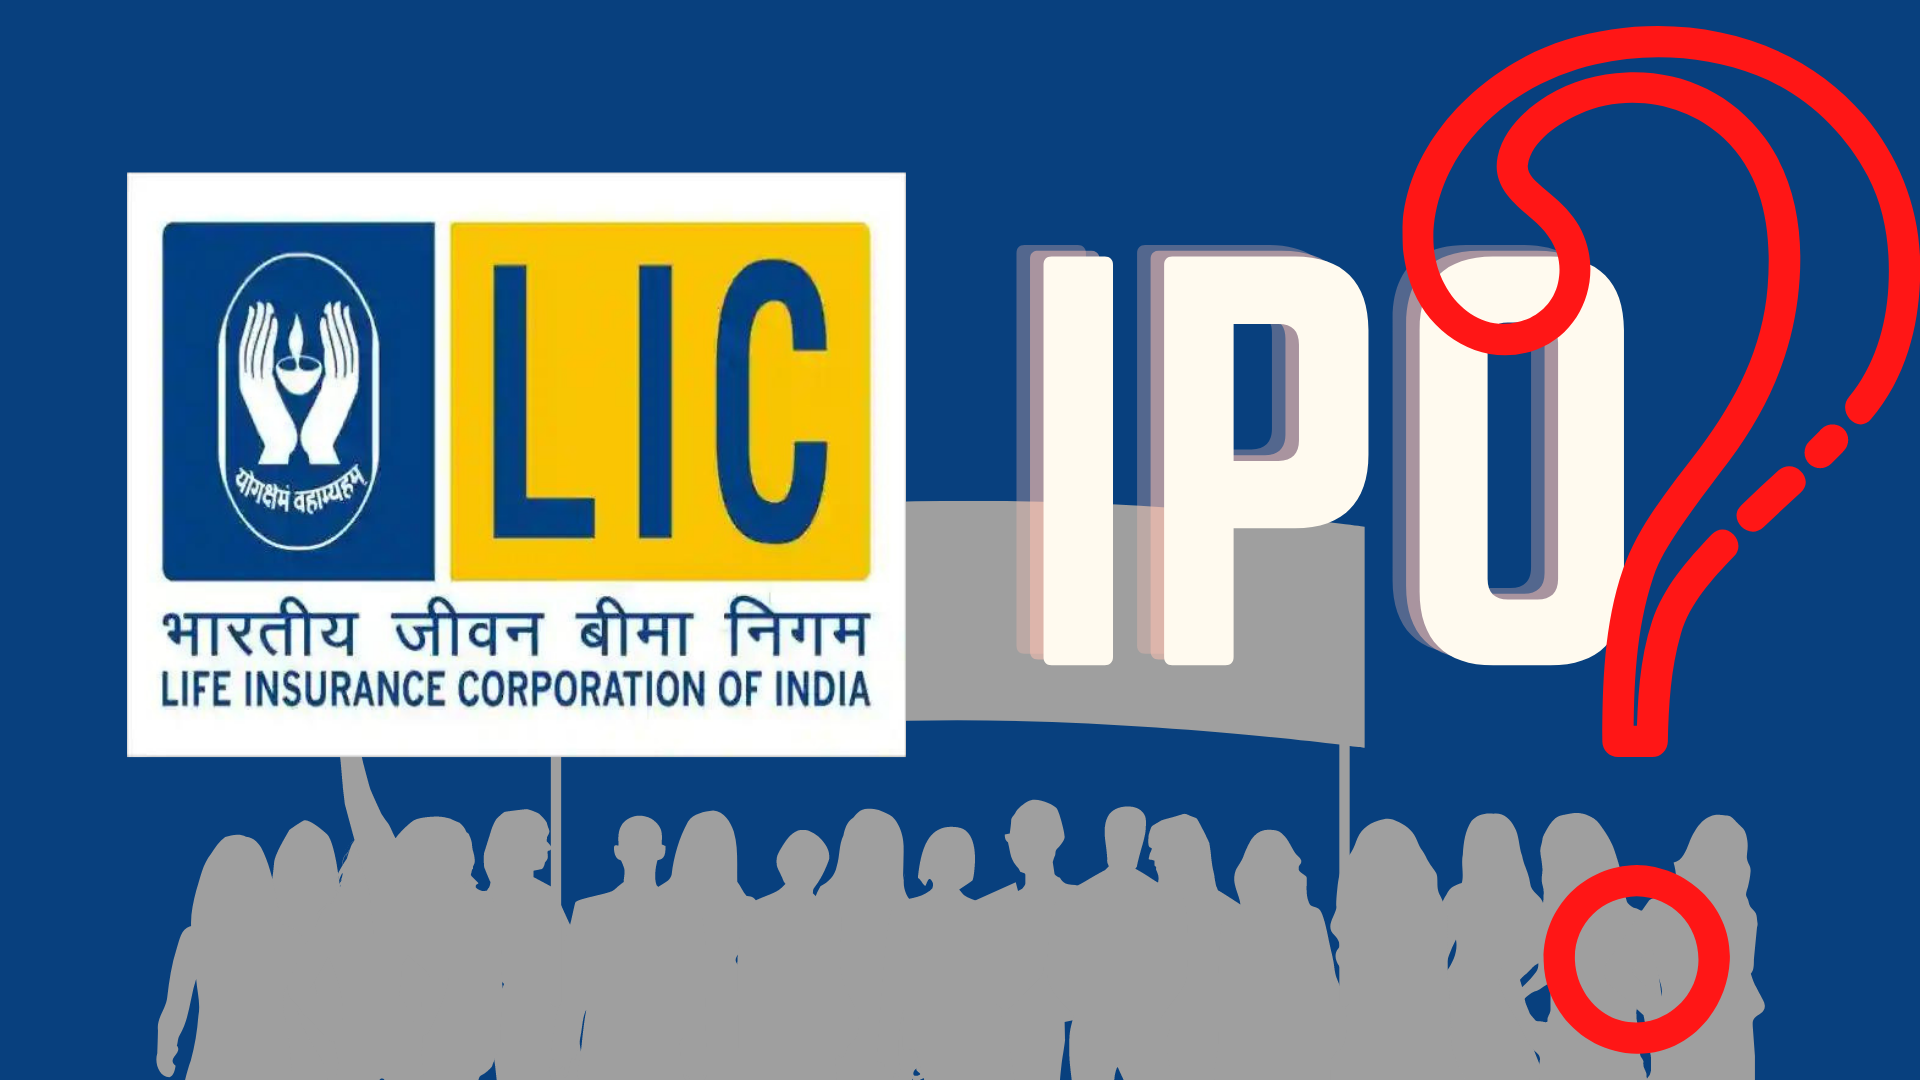 LIC Making Efforts To Redeem The IPO Listings By Organising Roadshows In Foreign Lands: Is This Just An Approach To Global Investors Or An Attempt To Save The Insurance Behemoth From Further Downfalls?